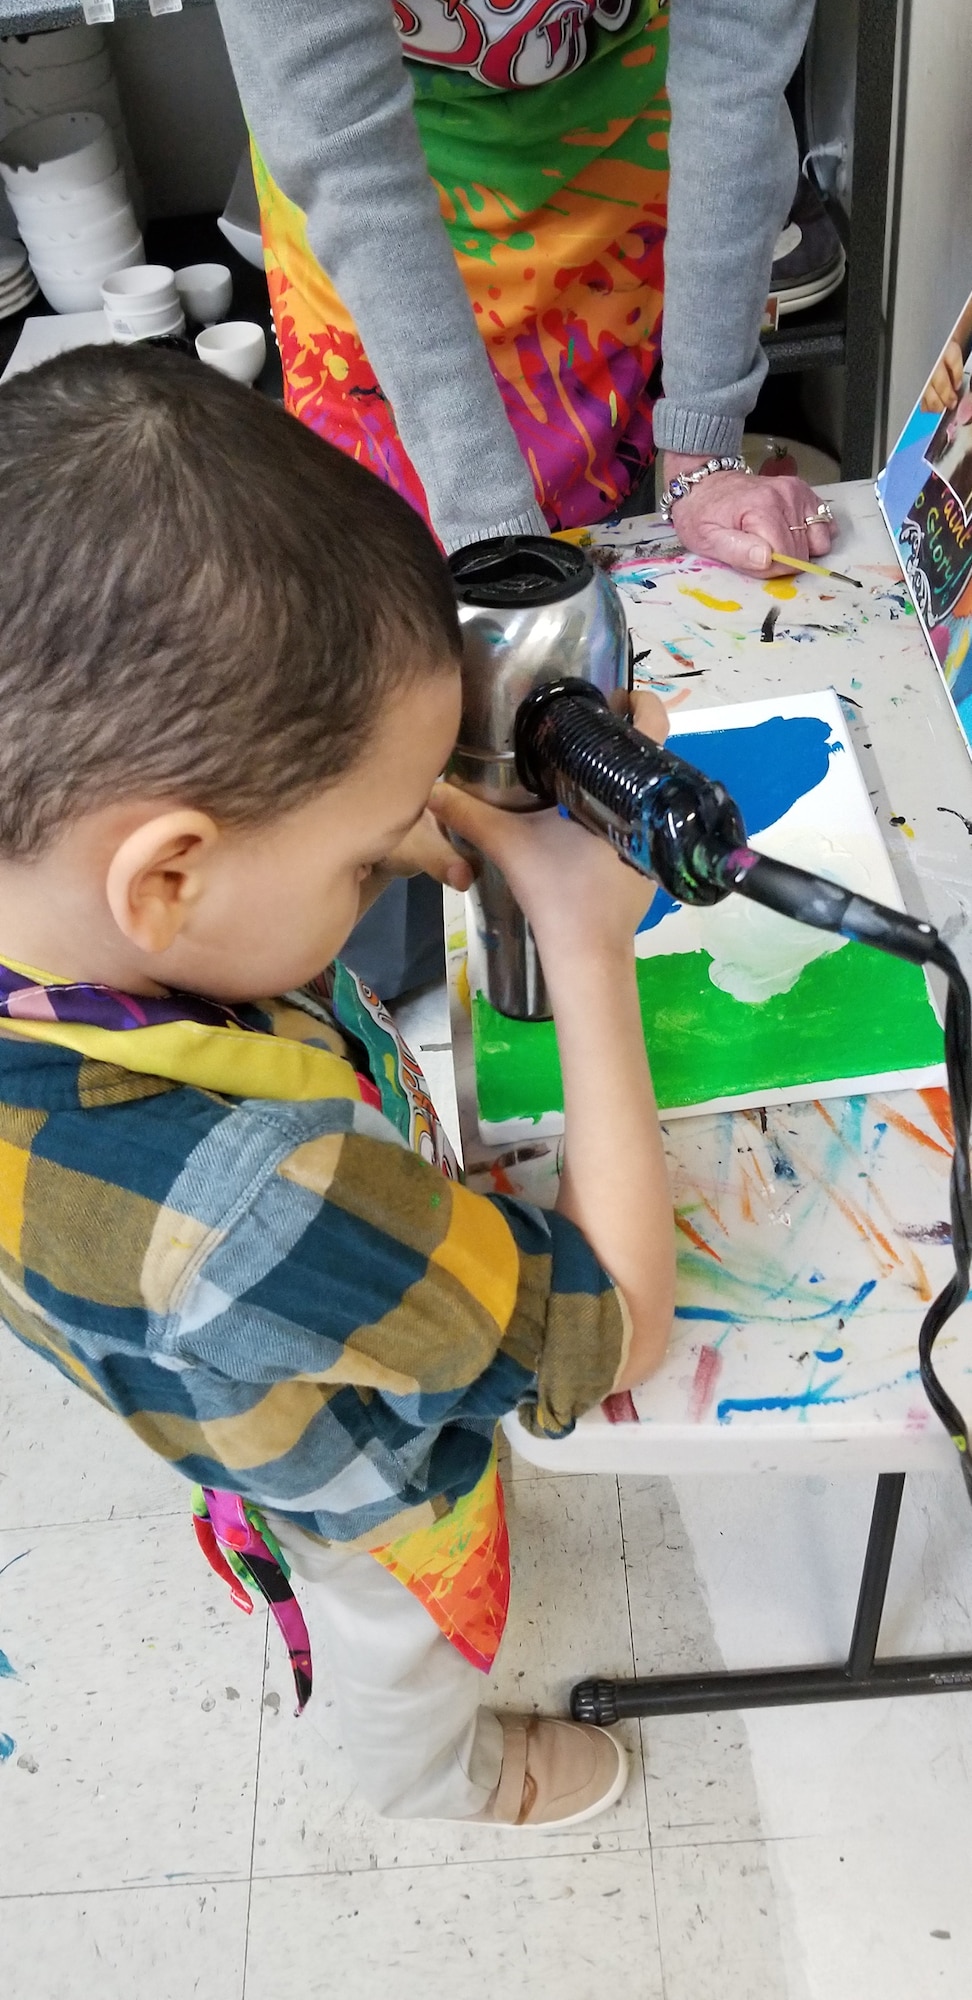 An Exceptional Family Member Program participant dries his artwork after a Creative Art Afternoon Jan. 19, 2018, at a local paint gallery. The EFM Program offers EFMP families the opportunity to partake in various activities/camps throughout the year. (Courtesy photo)